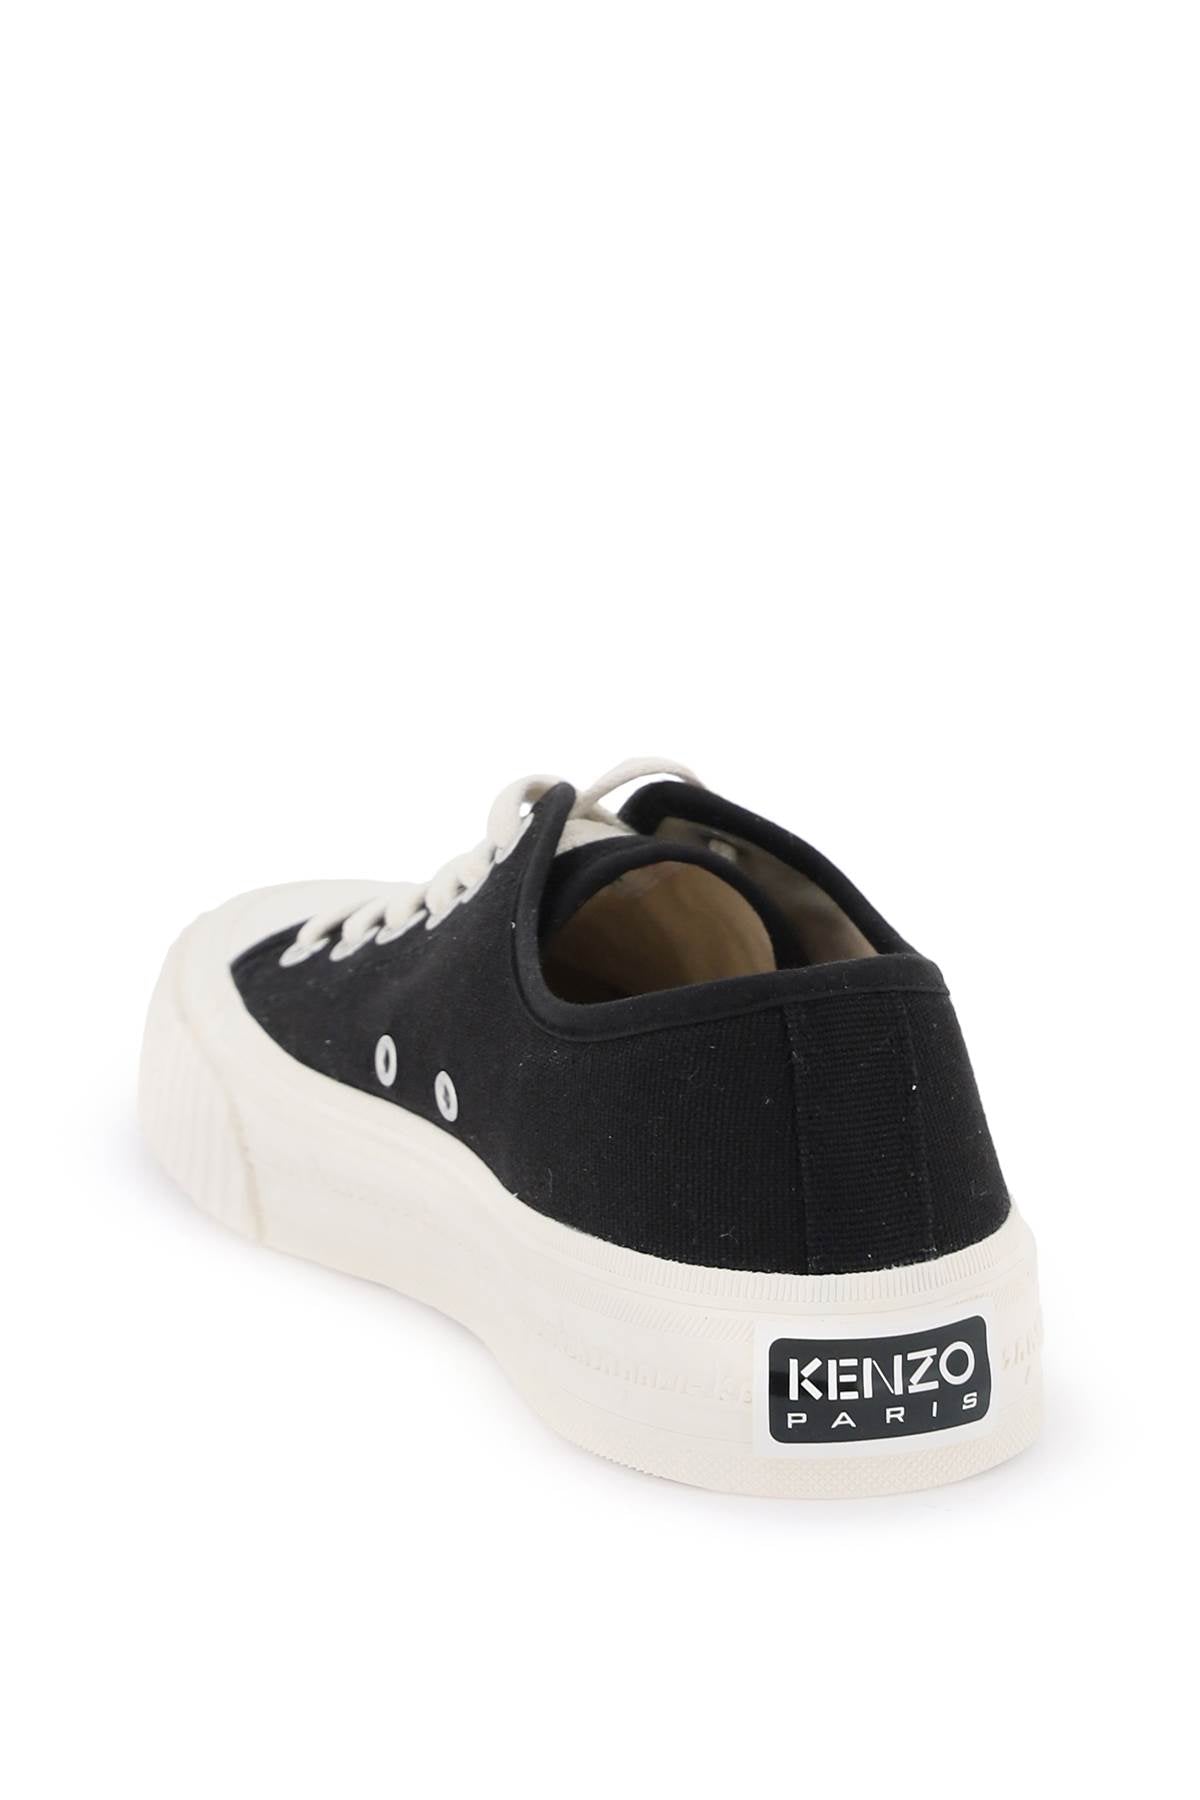 Kenzo foxy canvas sneakers for stylish-2